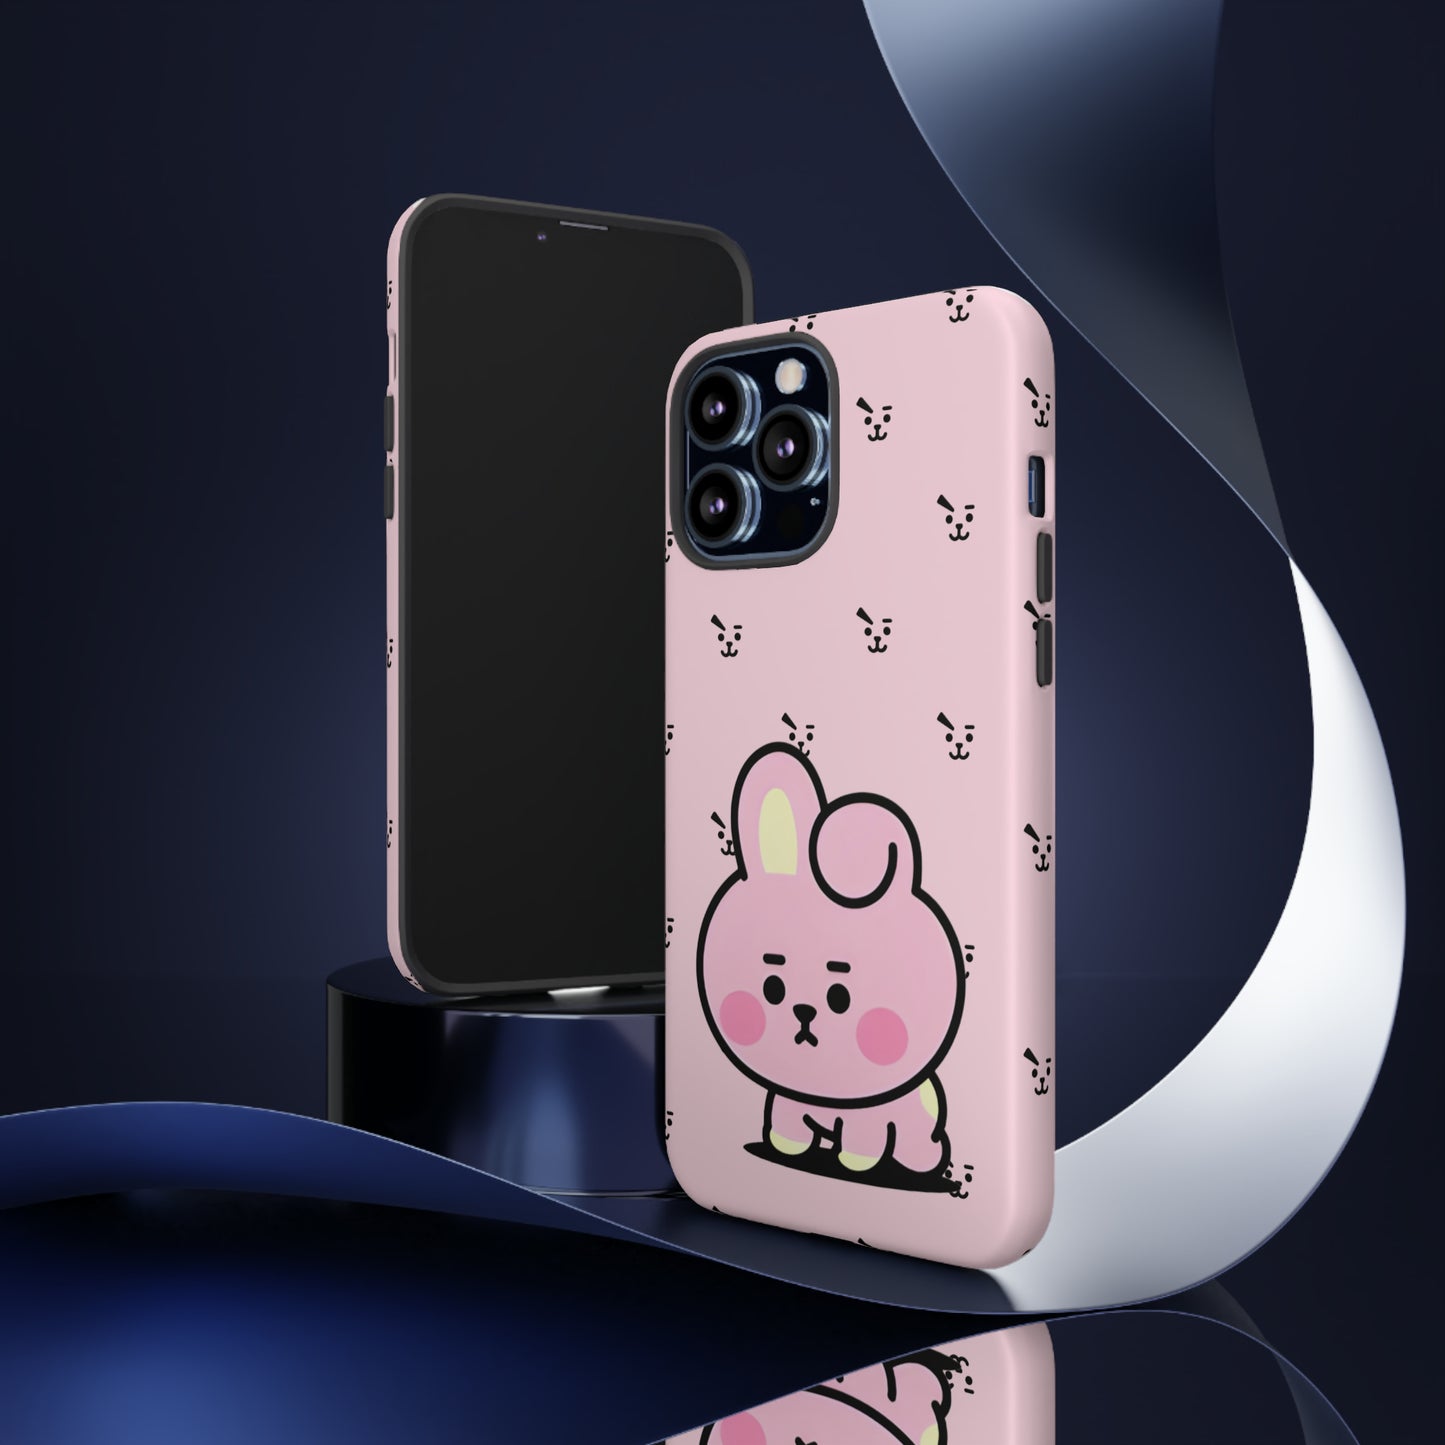 Cooky Iphone Case